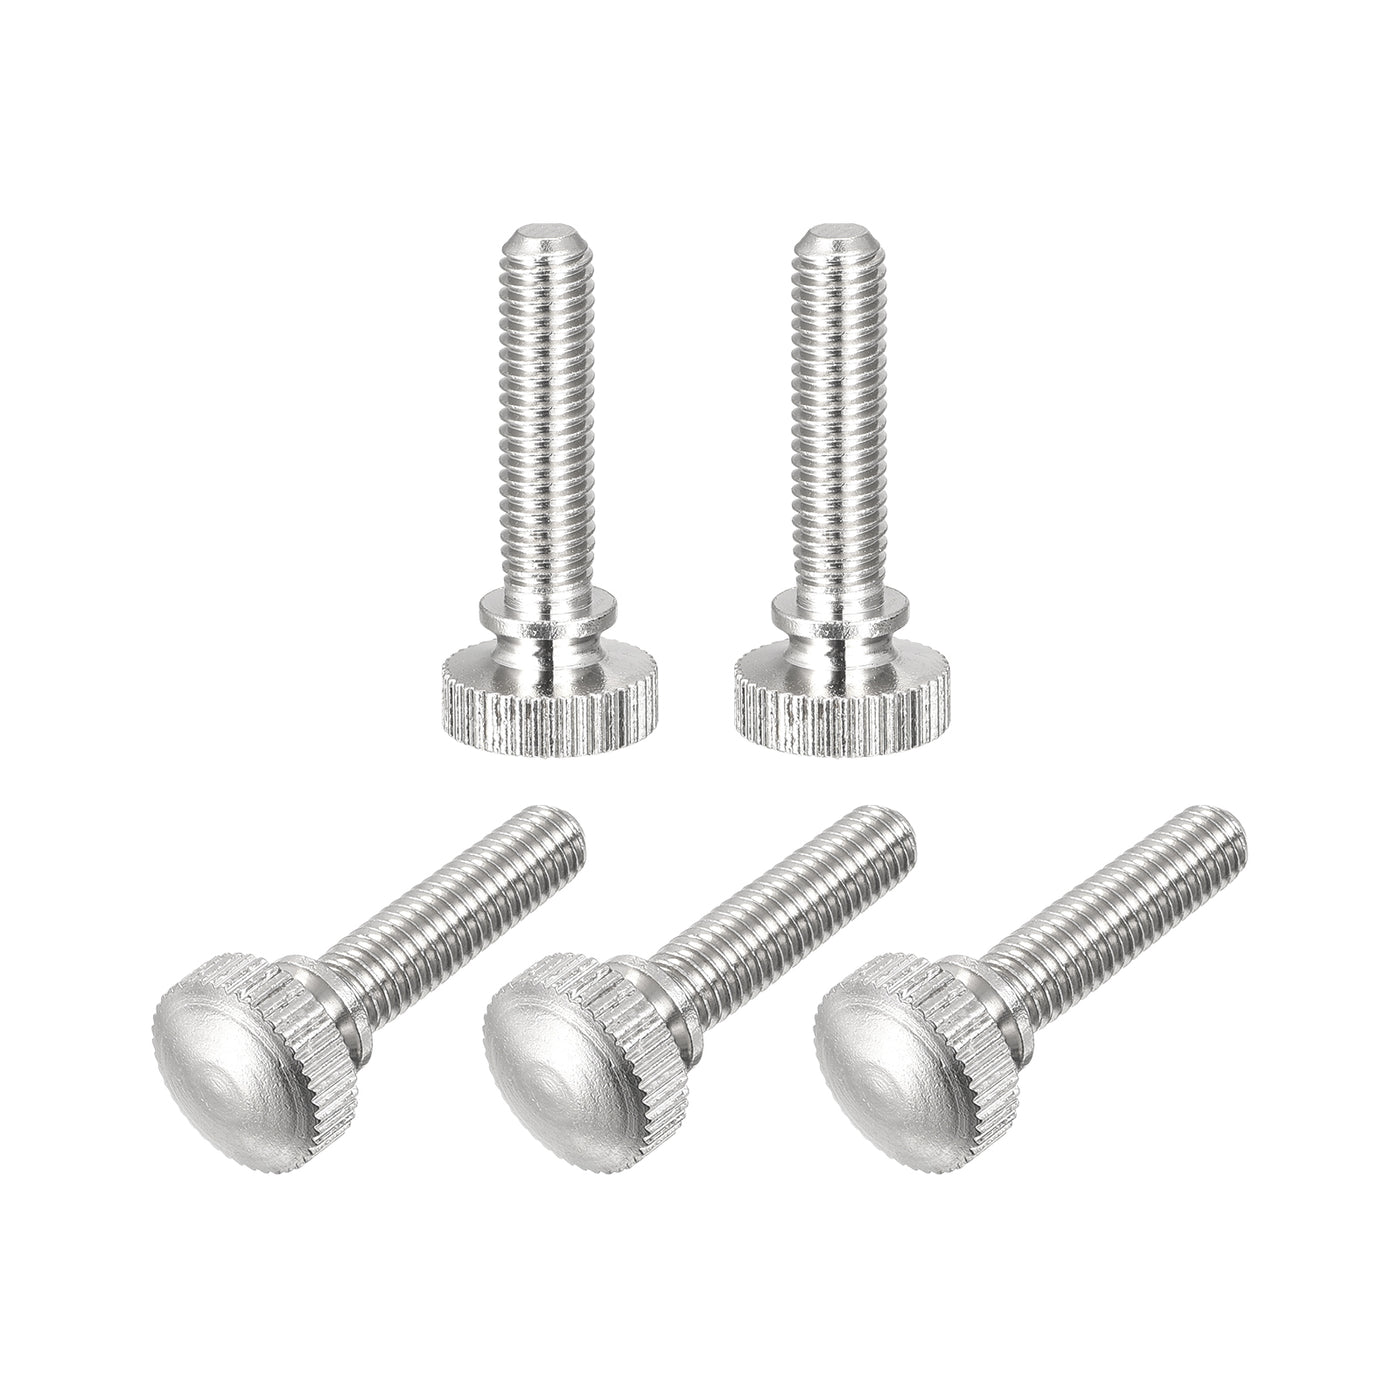 uxcell Uxcell Knurled Thumb Screws, M5x20mm Brass Shoulder Bolts Grip Knobs Fasteners, Nickel Plated 5Pcs